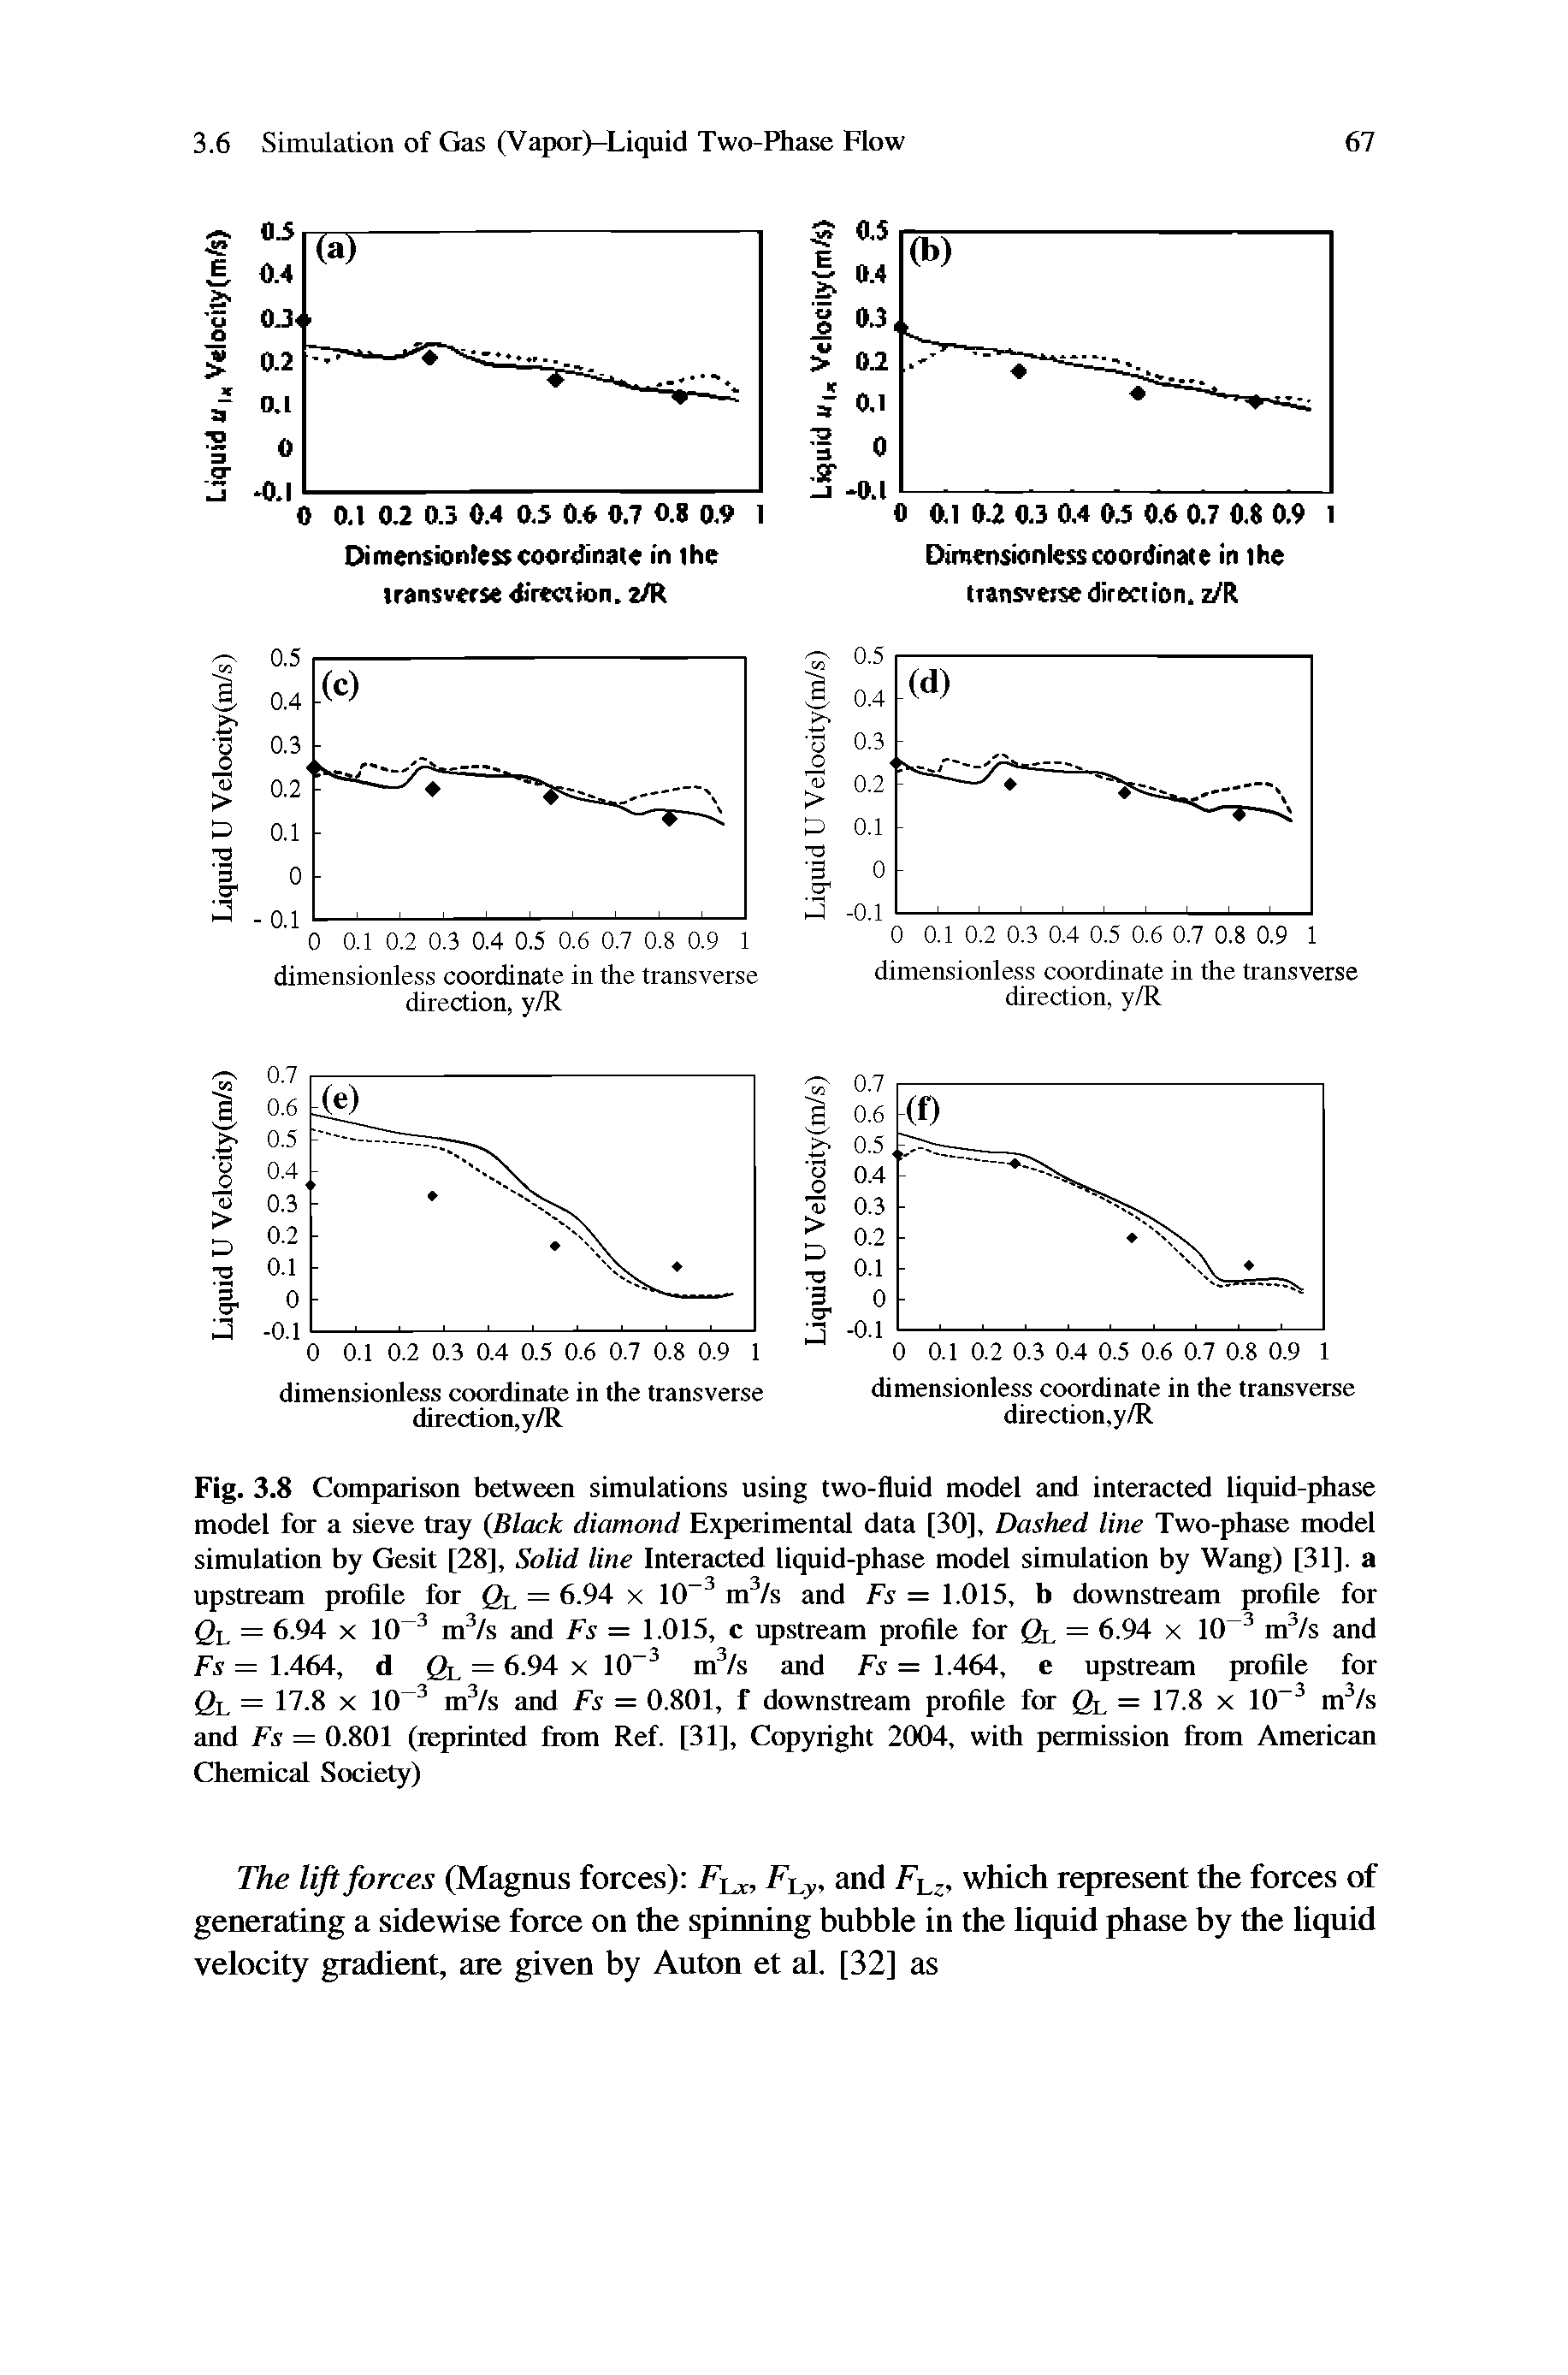 Fig. 3.8 Comparison between simulations using two-fluid model and interacted liquid-phase model for a sieve tray Black diamond Experimental data [30], Dashed line Two-phase model simulation by Gesit [28], Solid line Interacted liquid-phase model simulation by Wang) [31], a upstream profile for 2l = 6.94 x 10 m /s and Fs = 1.015, b downstream profile for...